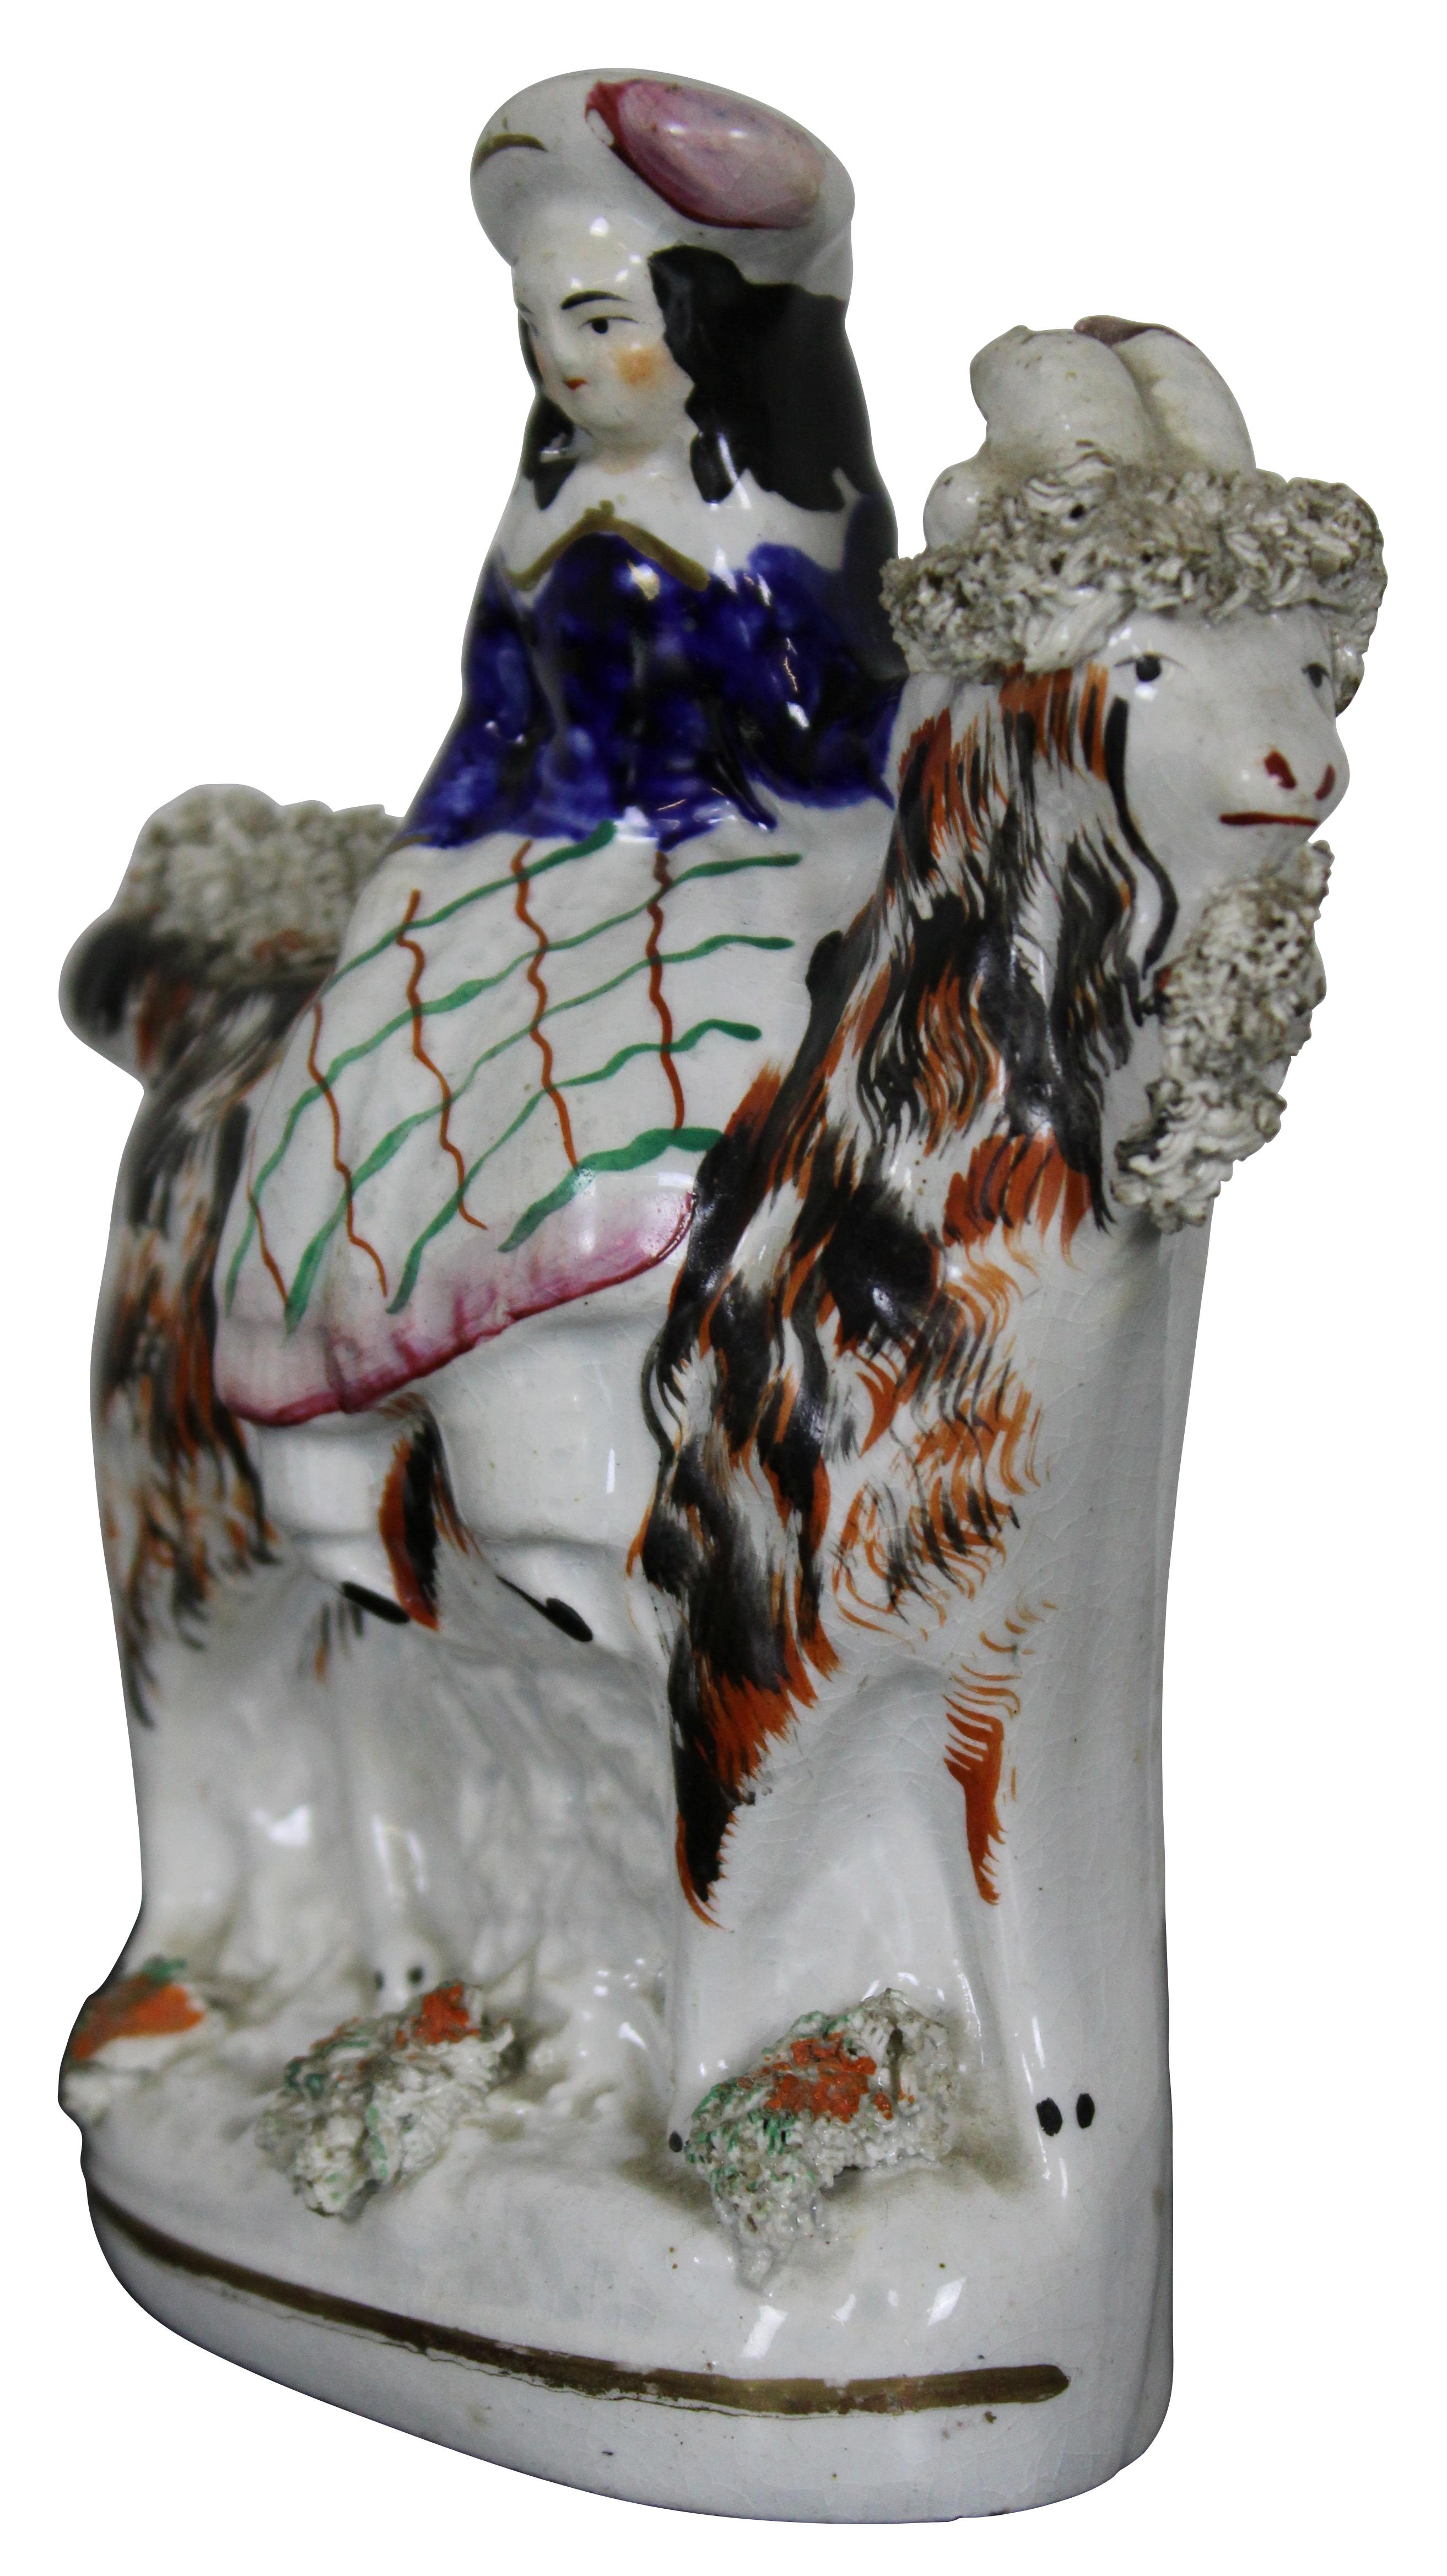 Antique 19th century Staffordshire England porcelain figurine of a Scottish girl dressed in traditional attire with plaid skirt; seated on a large shaggy goat. Measures: 5.5